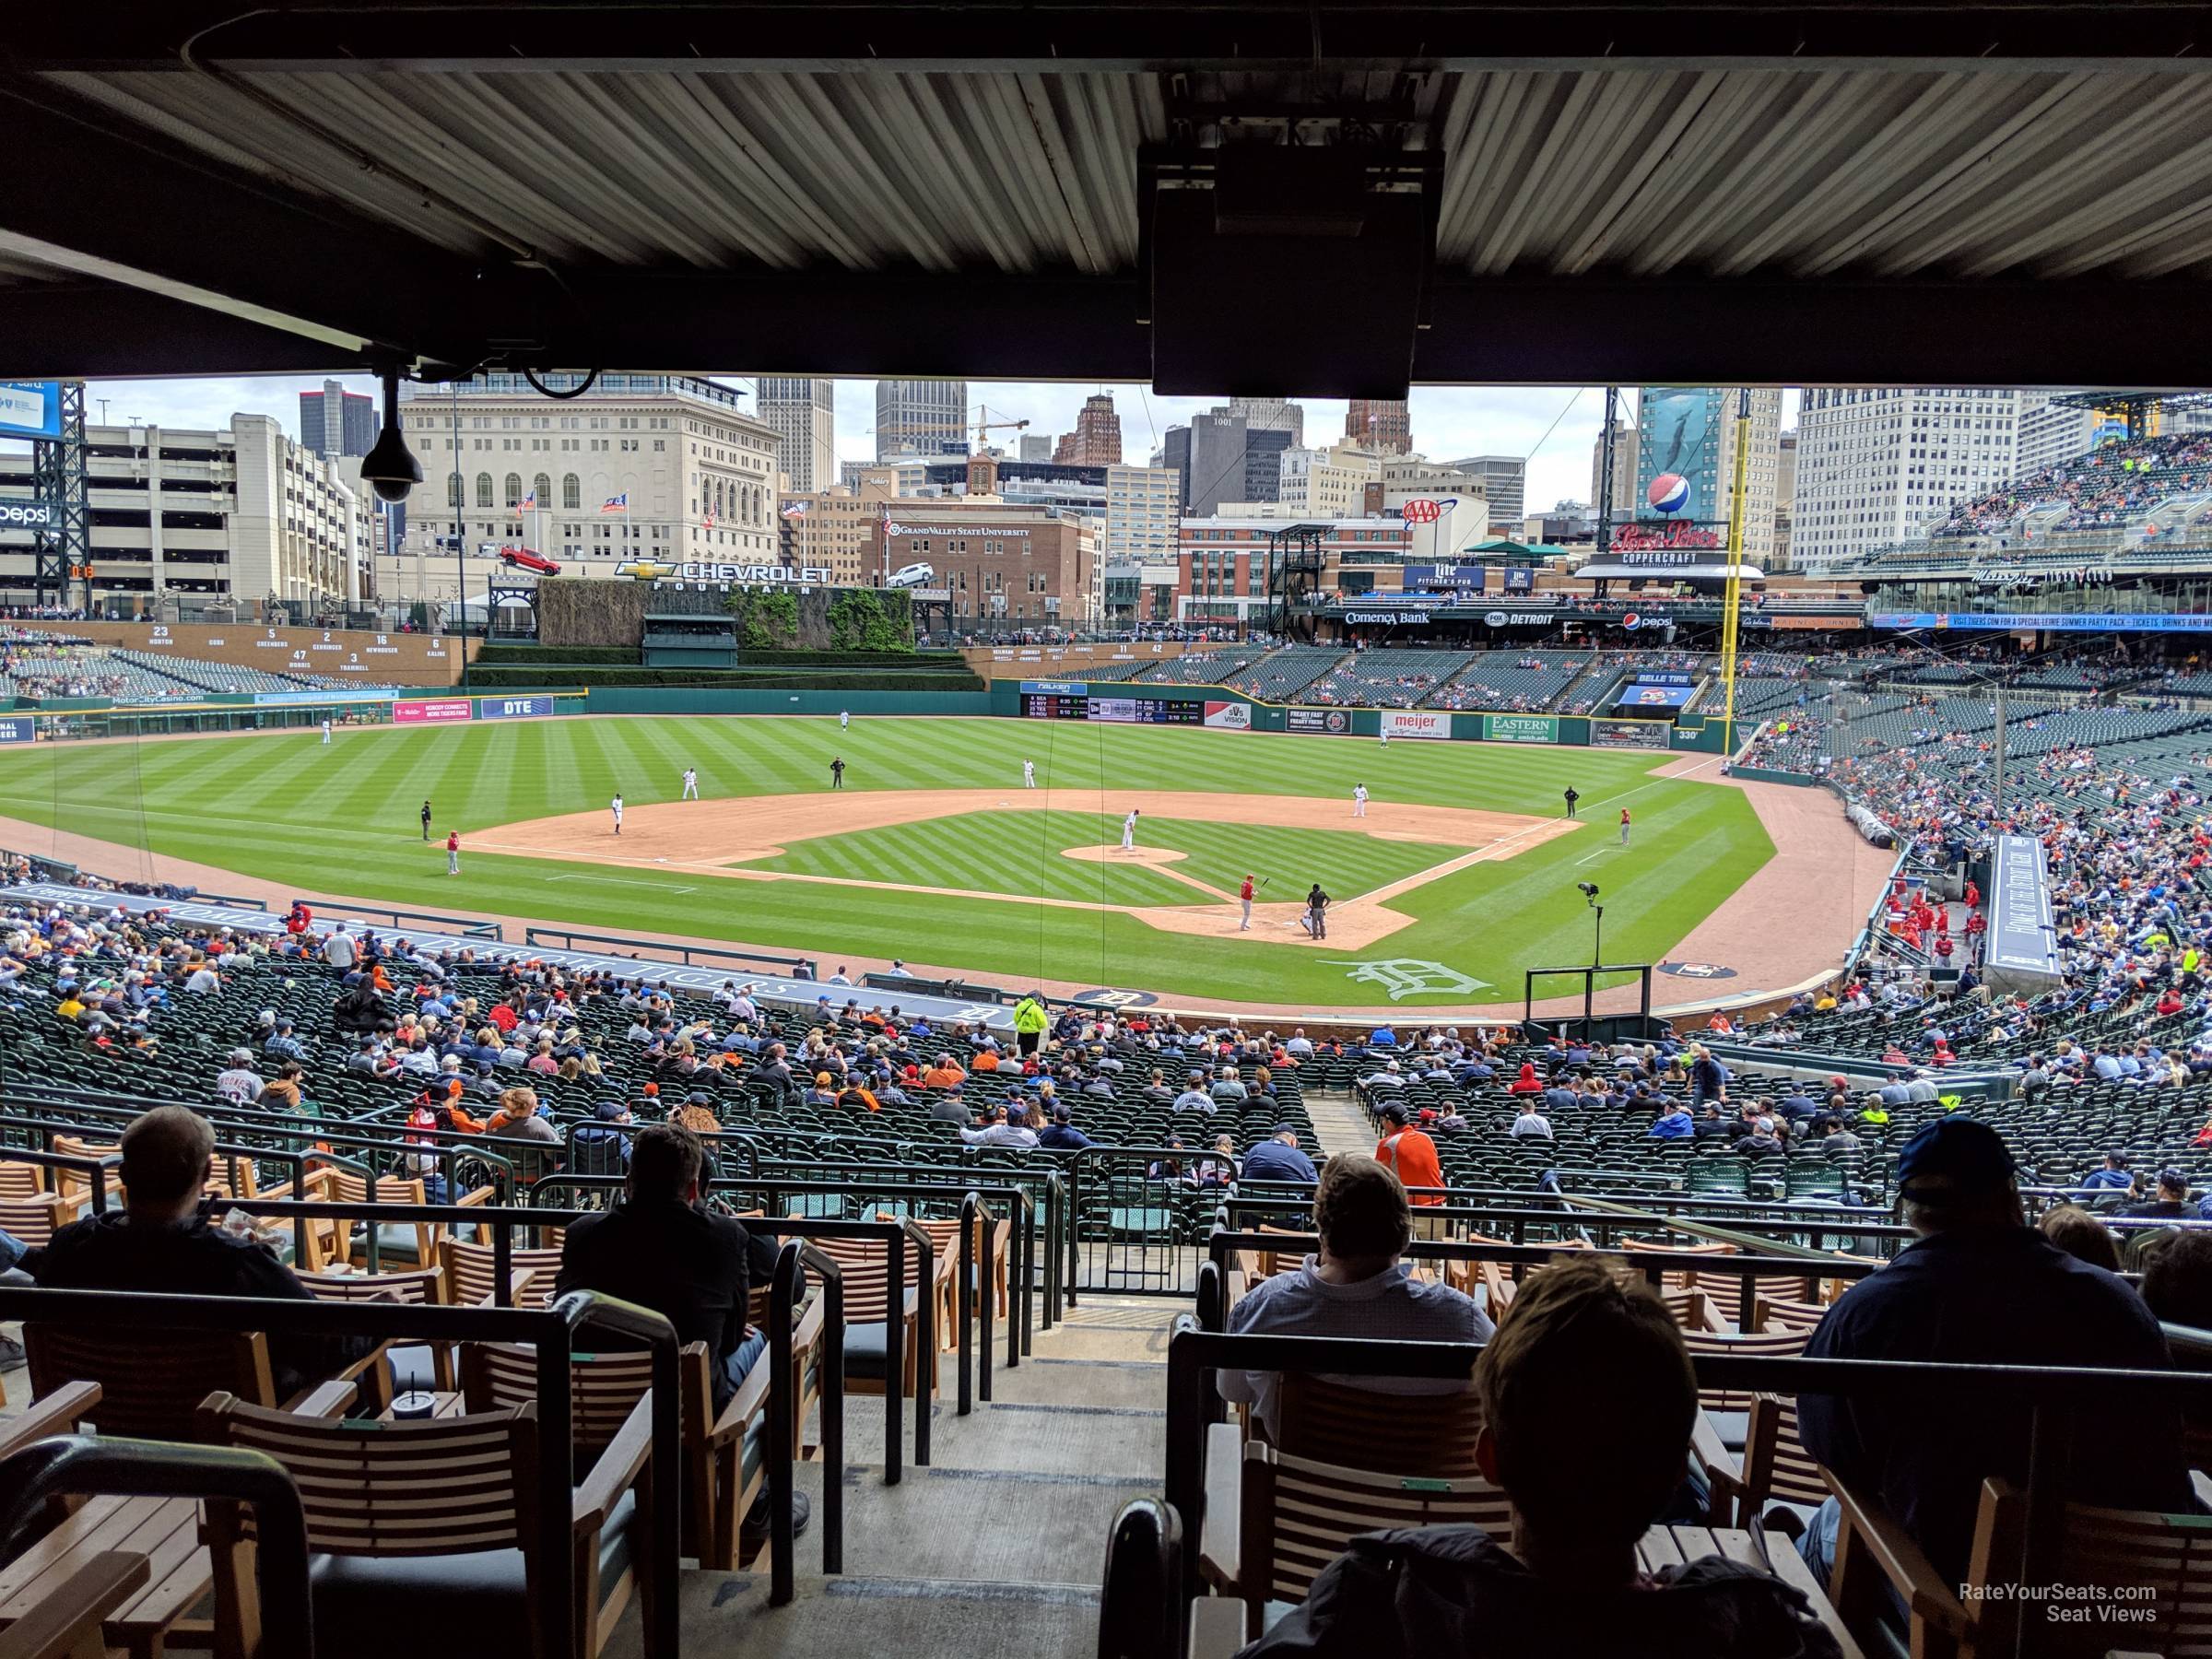 Shaded Seats at Comerica Park - Find Tigers Tickets in the Shade